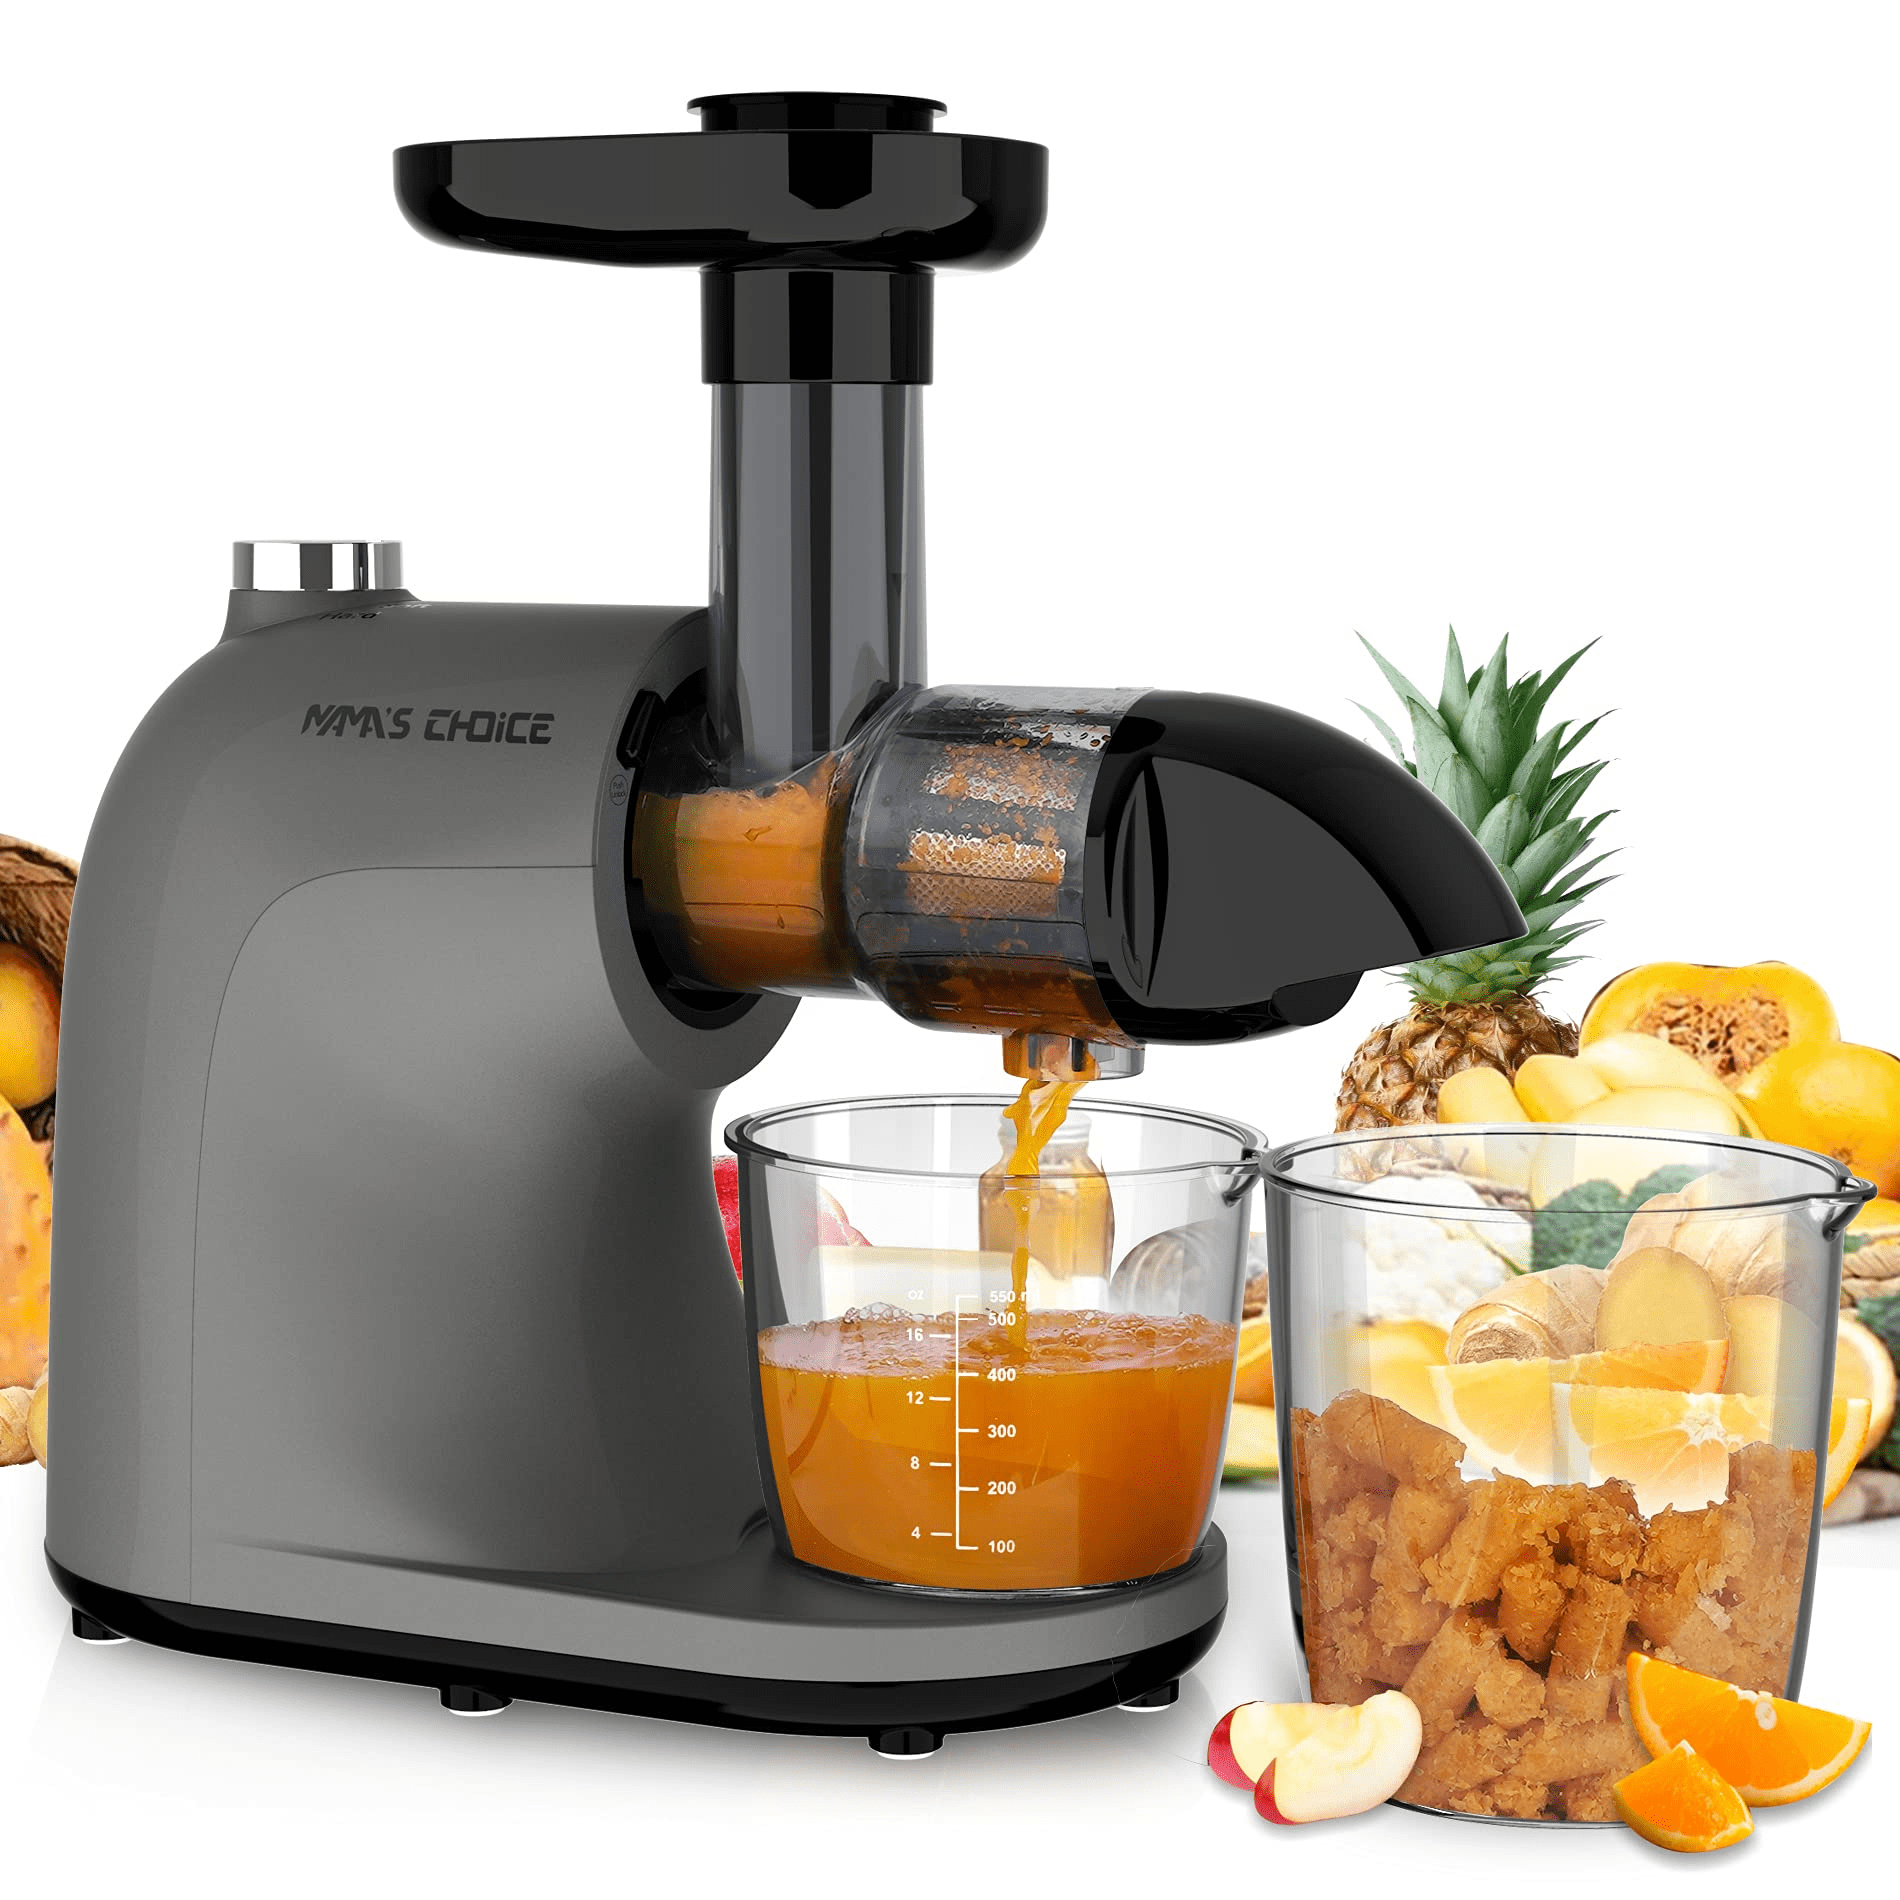 Easy Cleaning & Quiet Motor Masticating Juicer Machines for Vegetables and Fruits Renewed Orfeld Cold Press Juicer with 95% Juice Yield & Purest Juice Green Juicer Machines